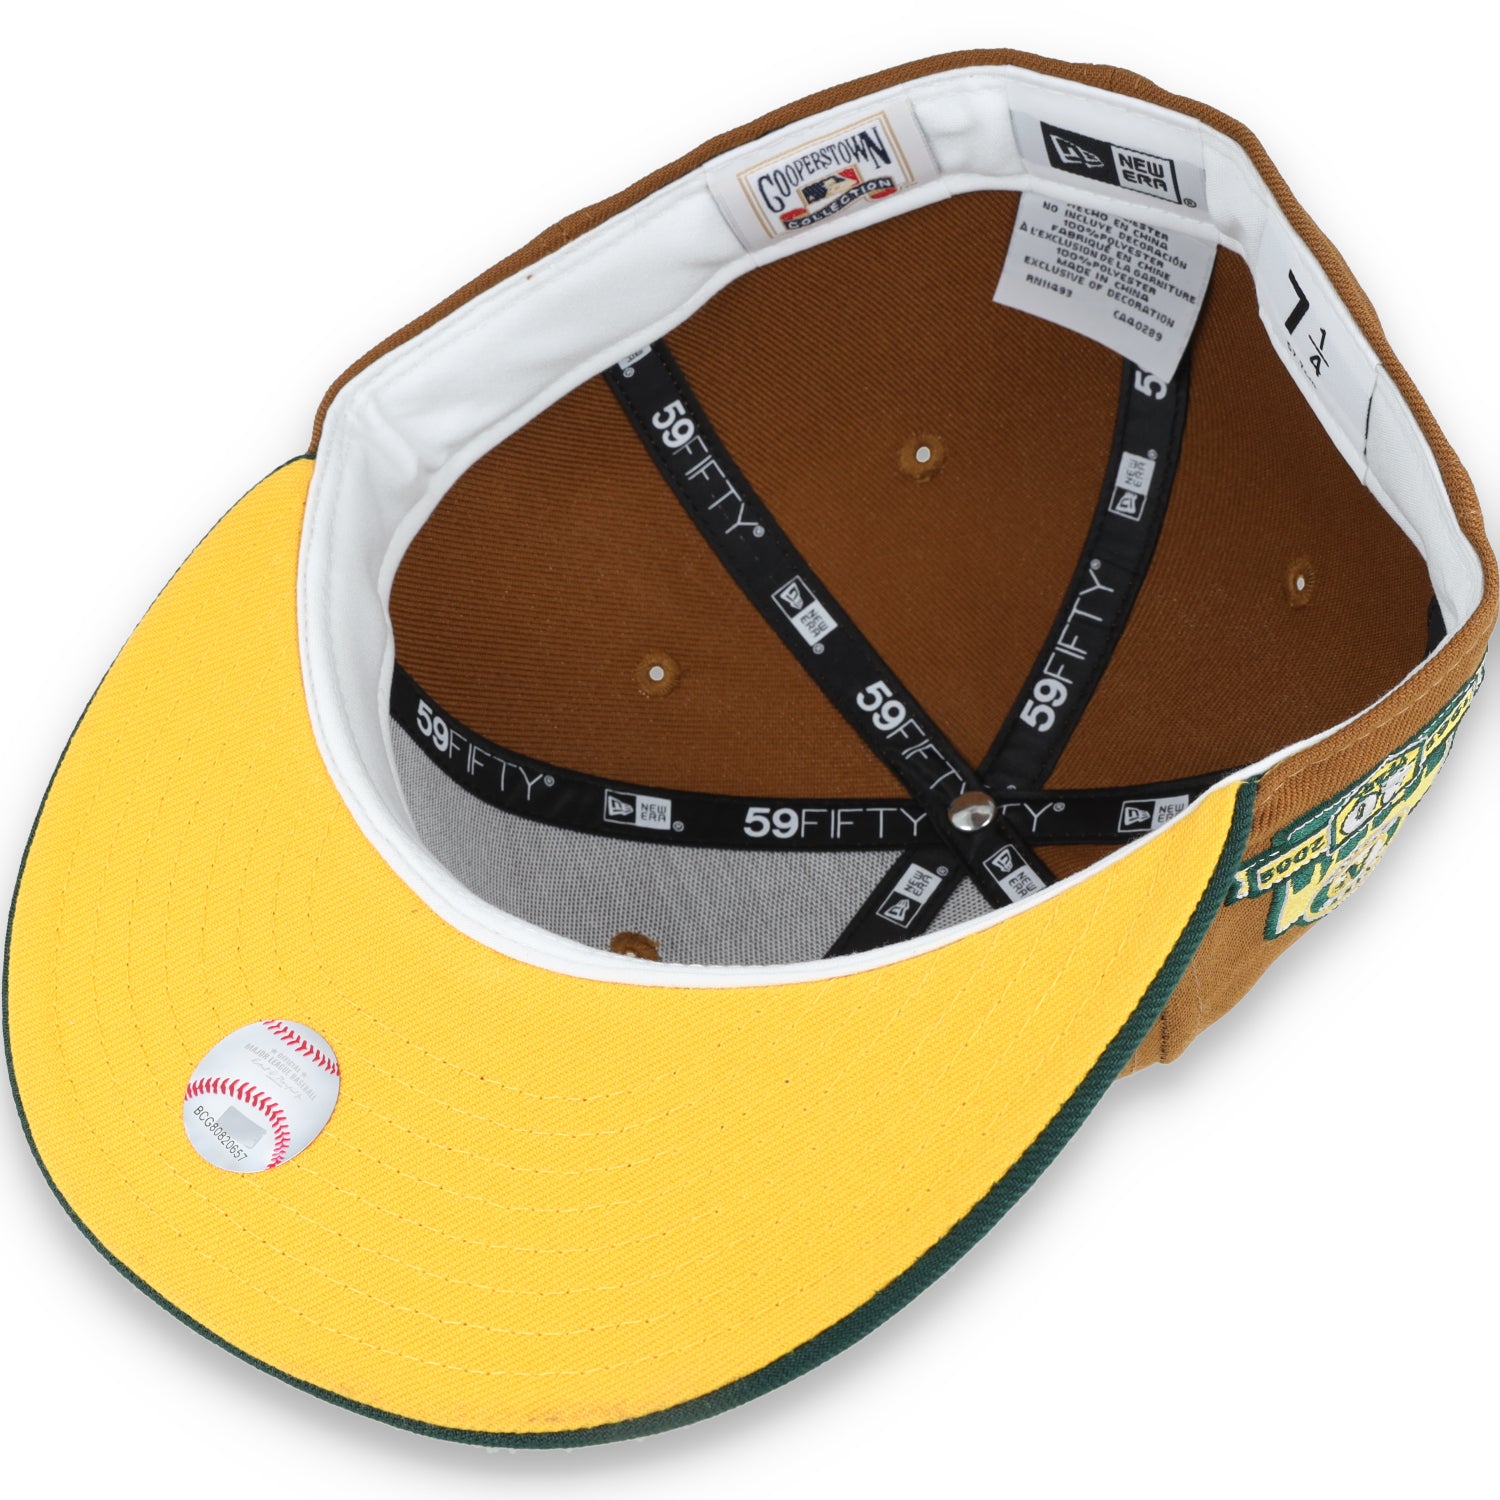 New Era Oakland Athletics 40th Anniversary Patch 59FIFTY Fitted-Peanut/DK Green